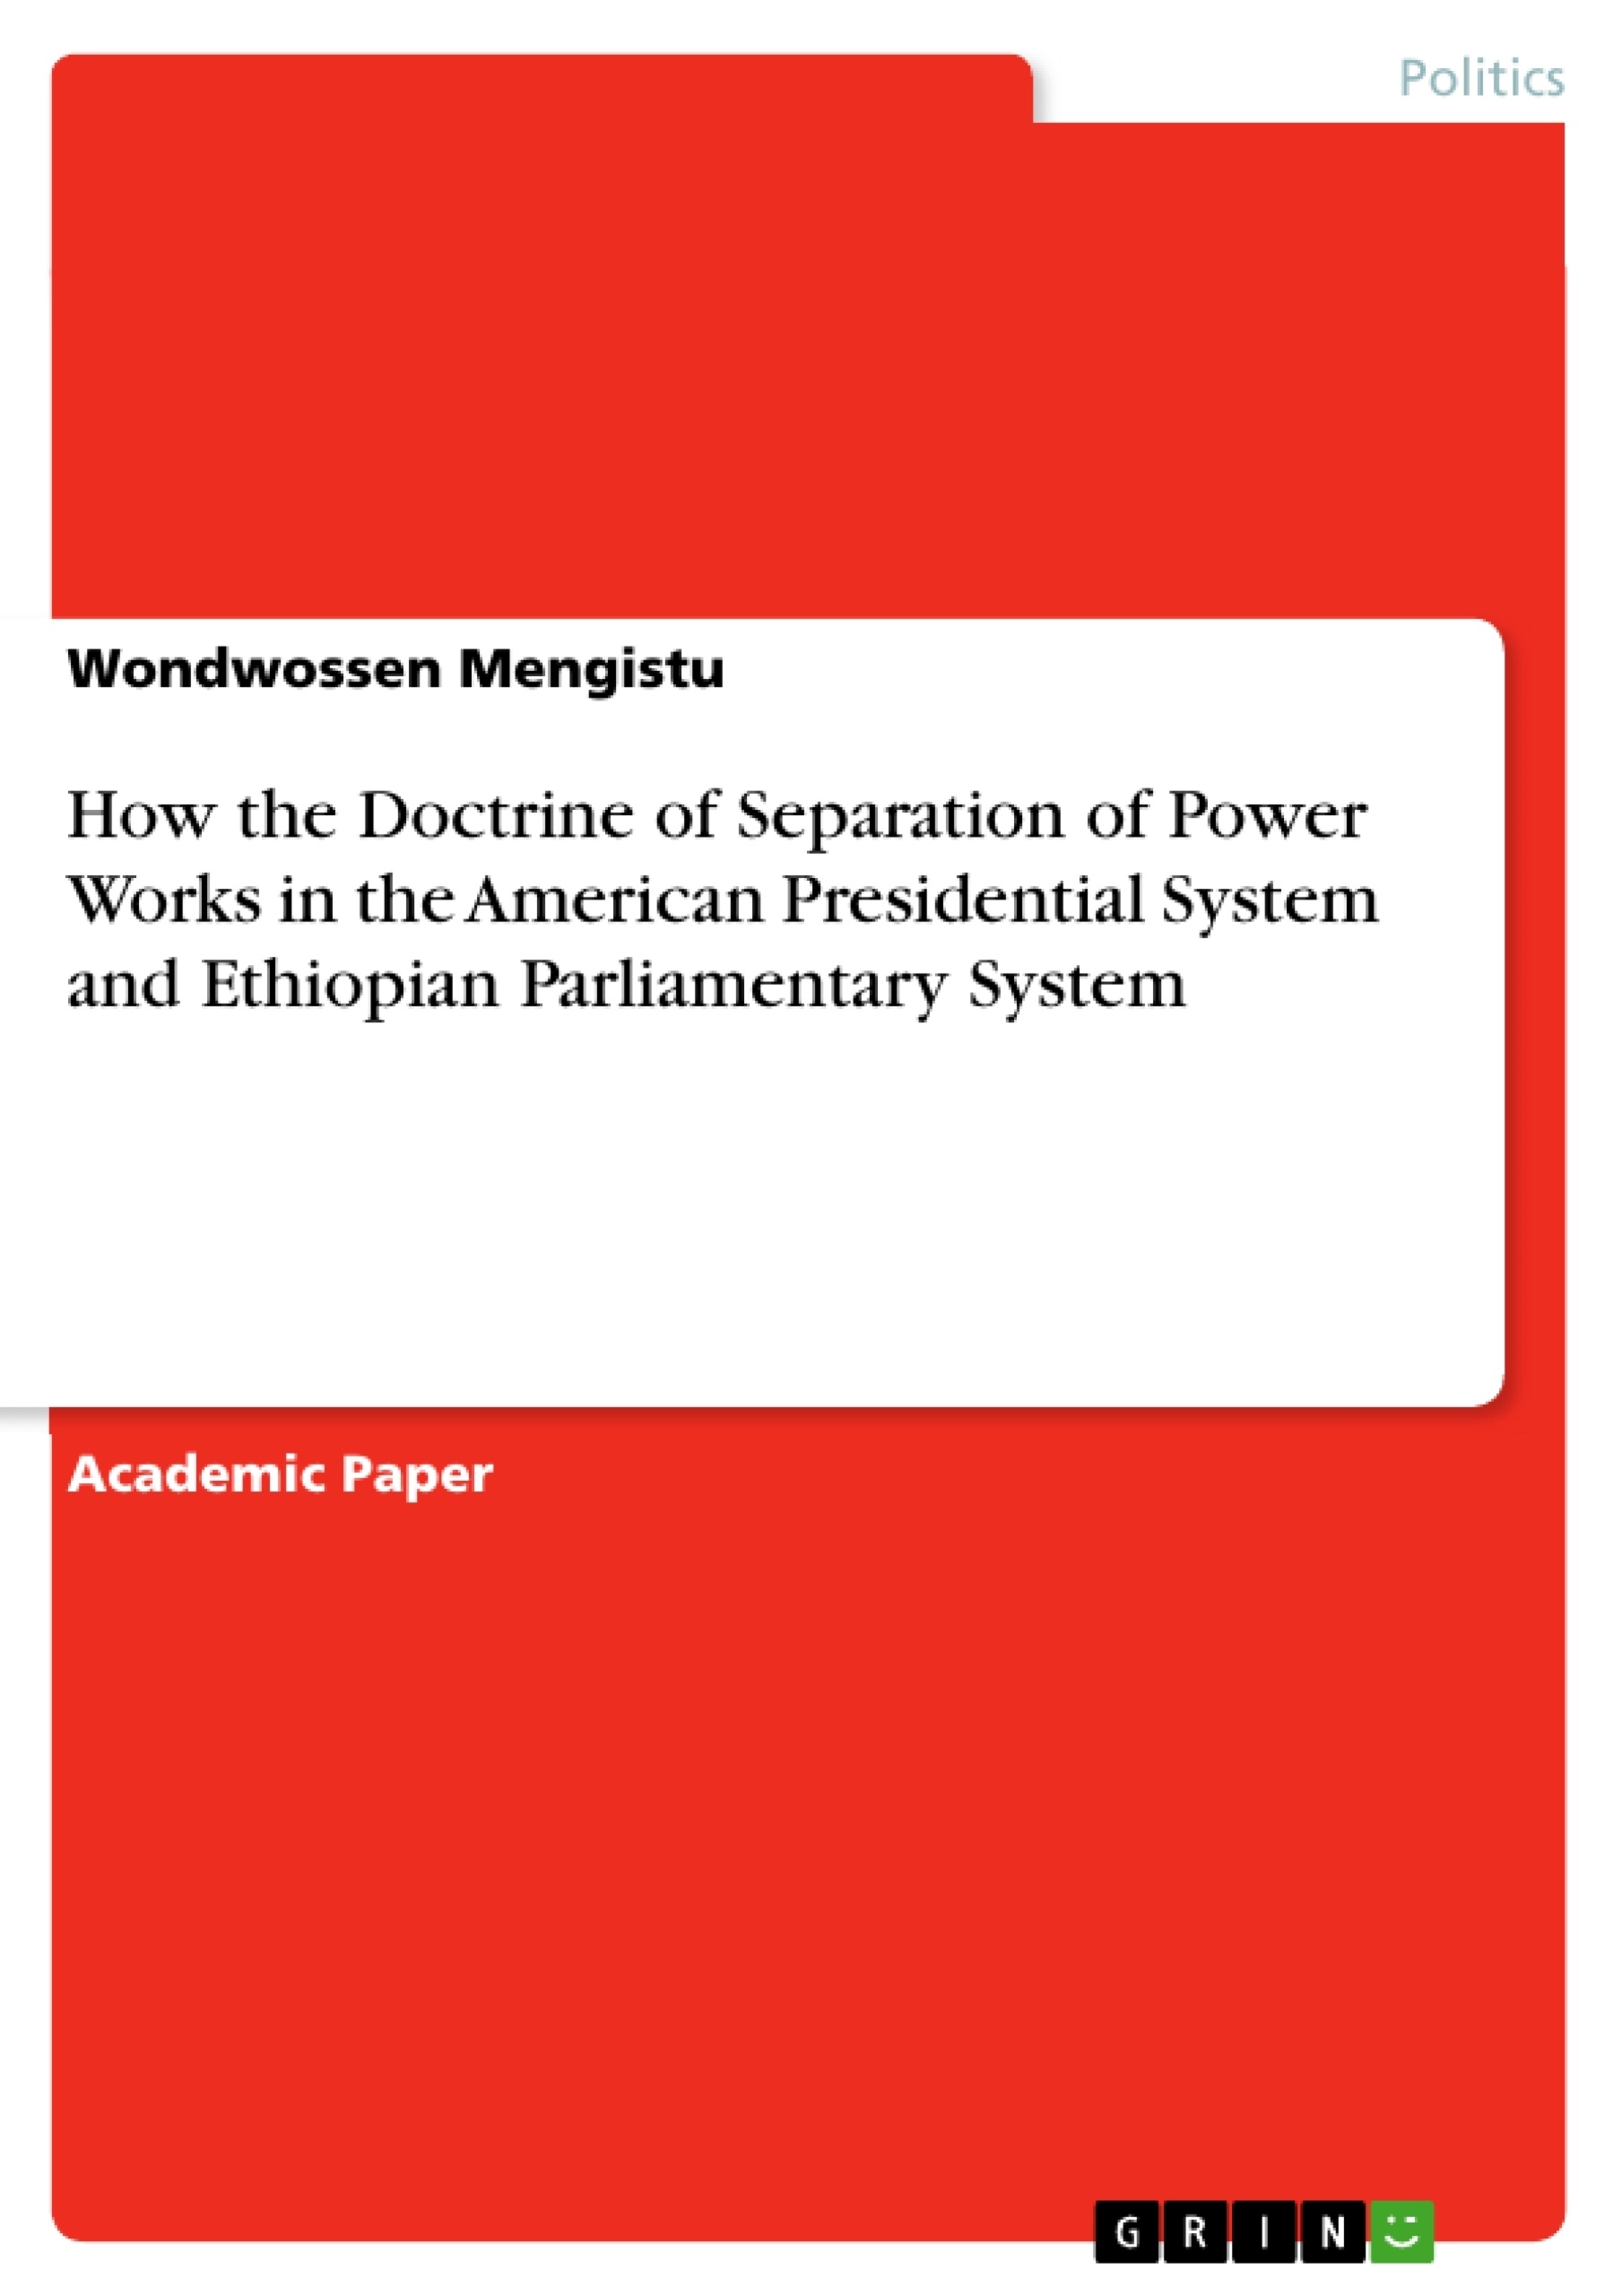 Título: How the Doctrine of Separation of Power Works in the American Presidential System and Ethiopian Parliamentary System